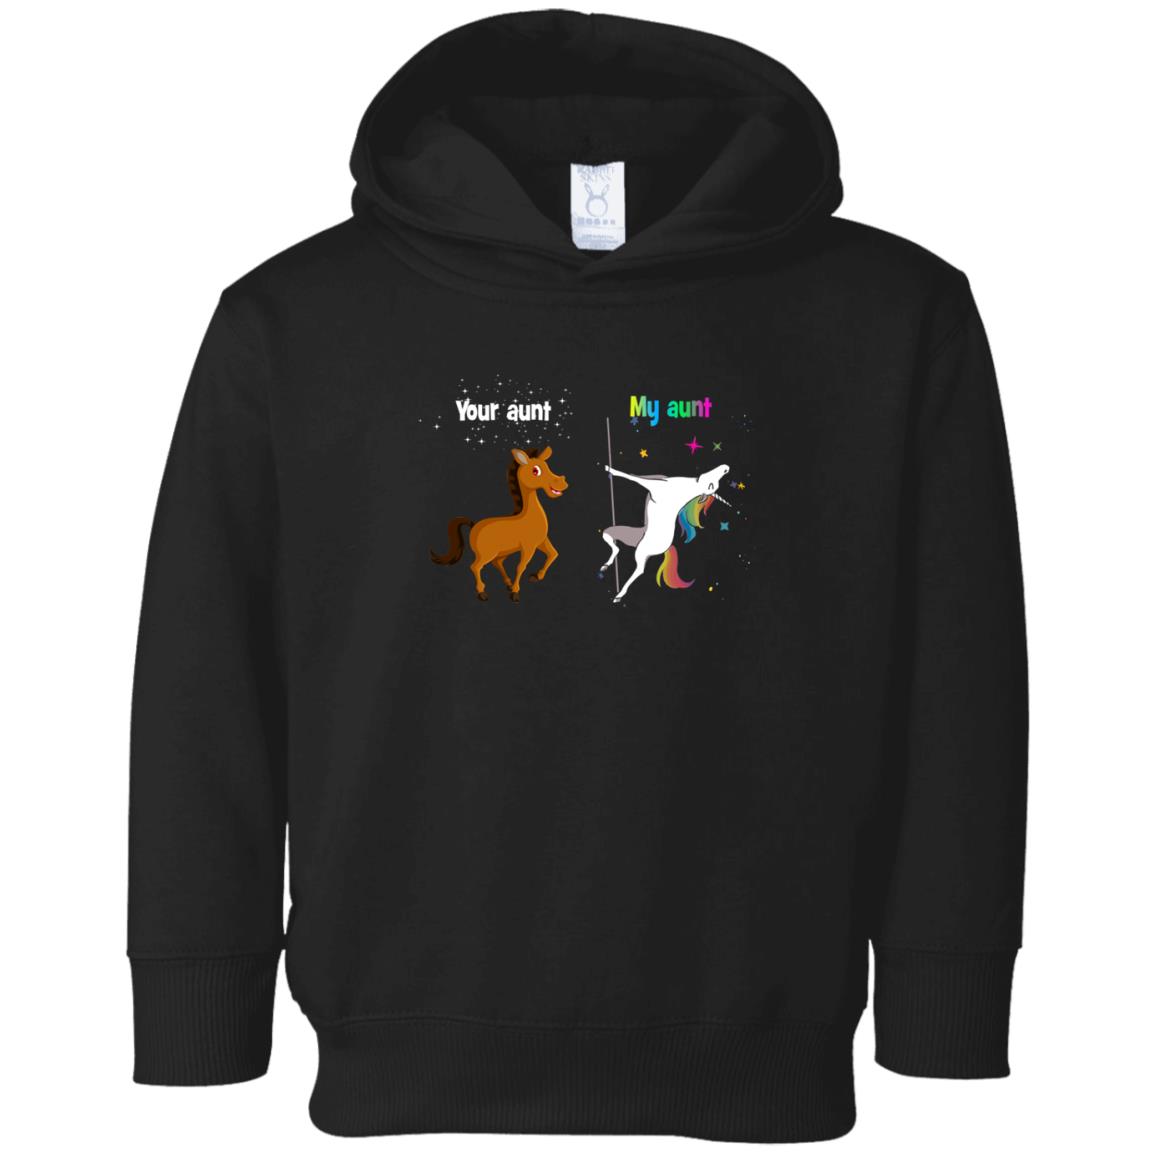 My aunt unicorn vs your aunt horse youth t-shirt